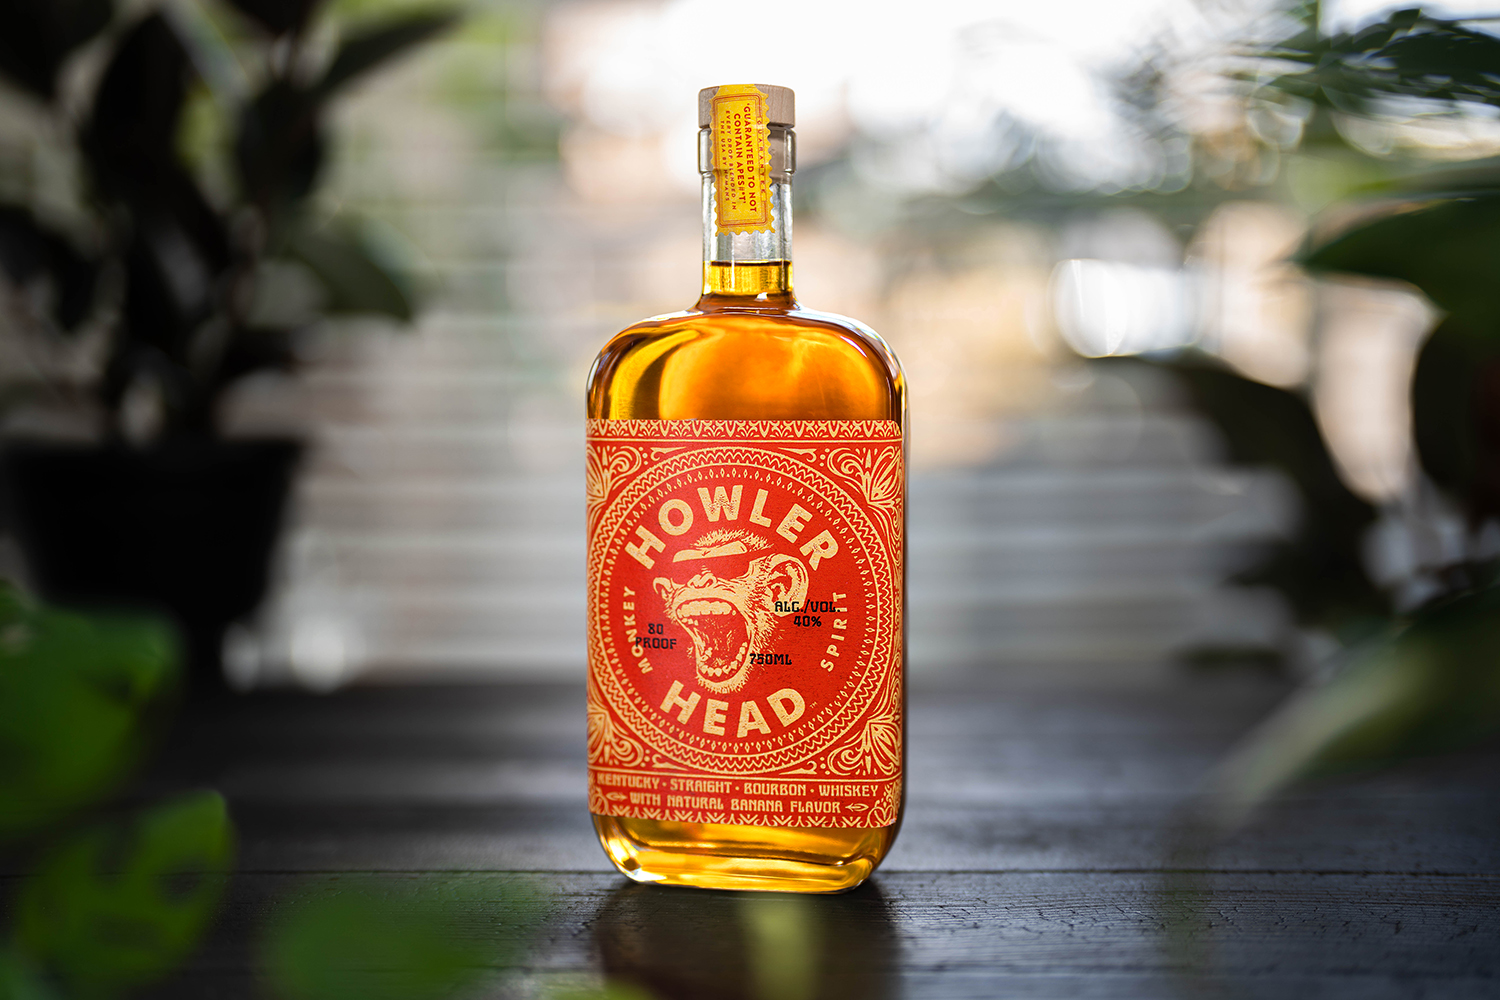 Howler Head Banana Bourbon Expands in the U.S. and Canada